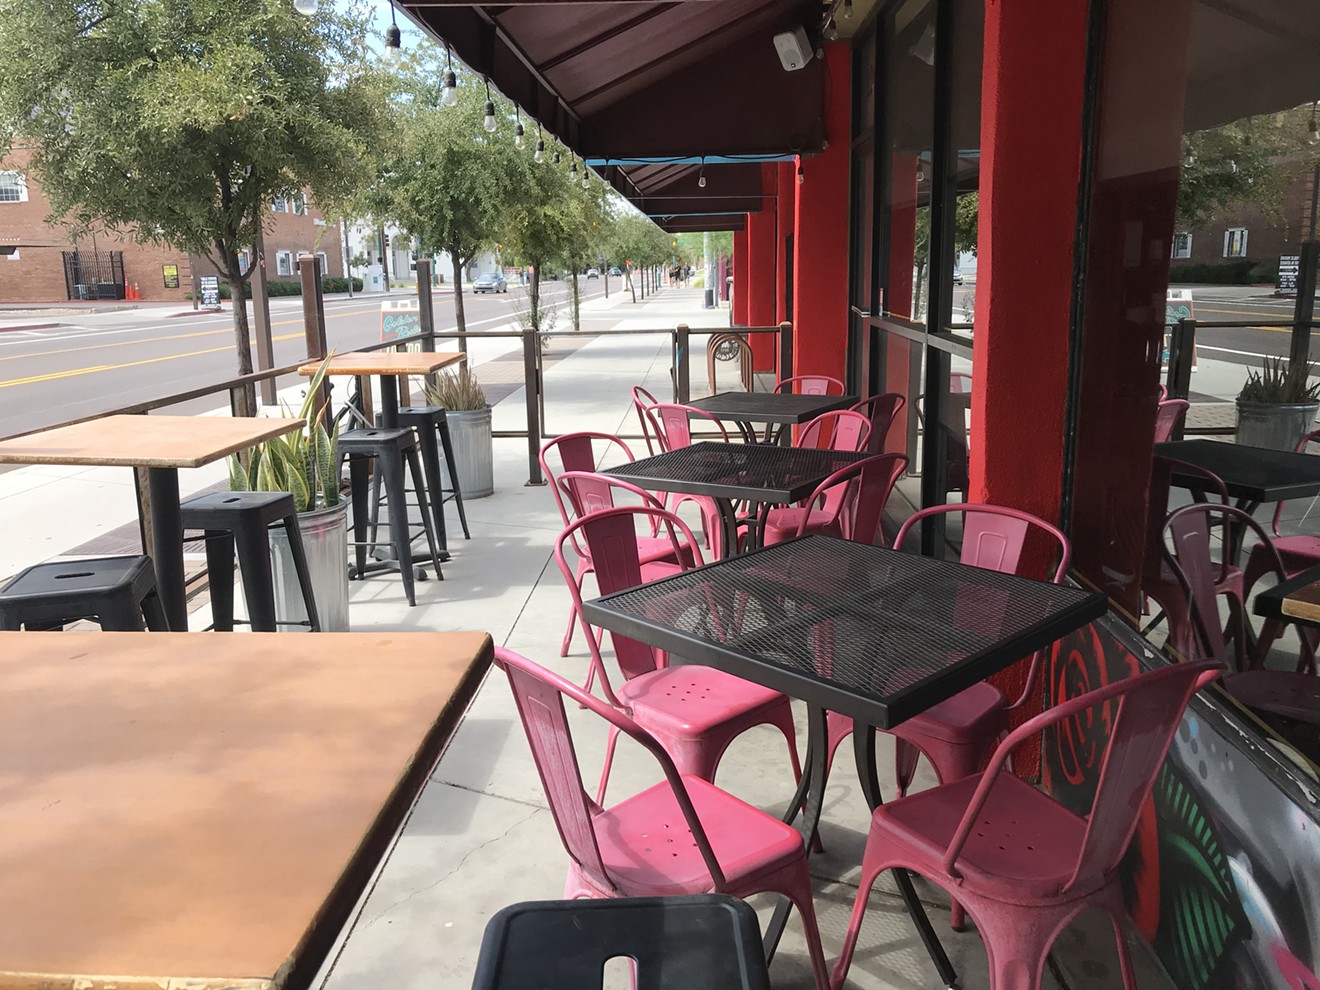 Restaurants may be getting up to $10,000 each for outdoor dining accessories under the Safest Outside Restaurant Assistance Program.